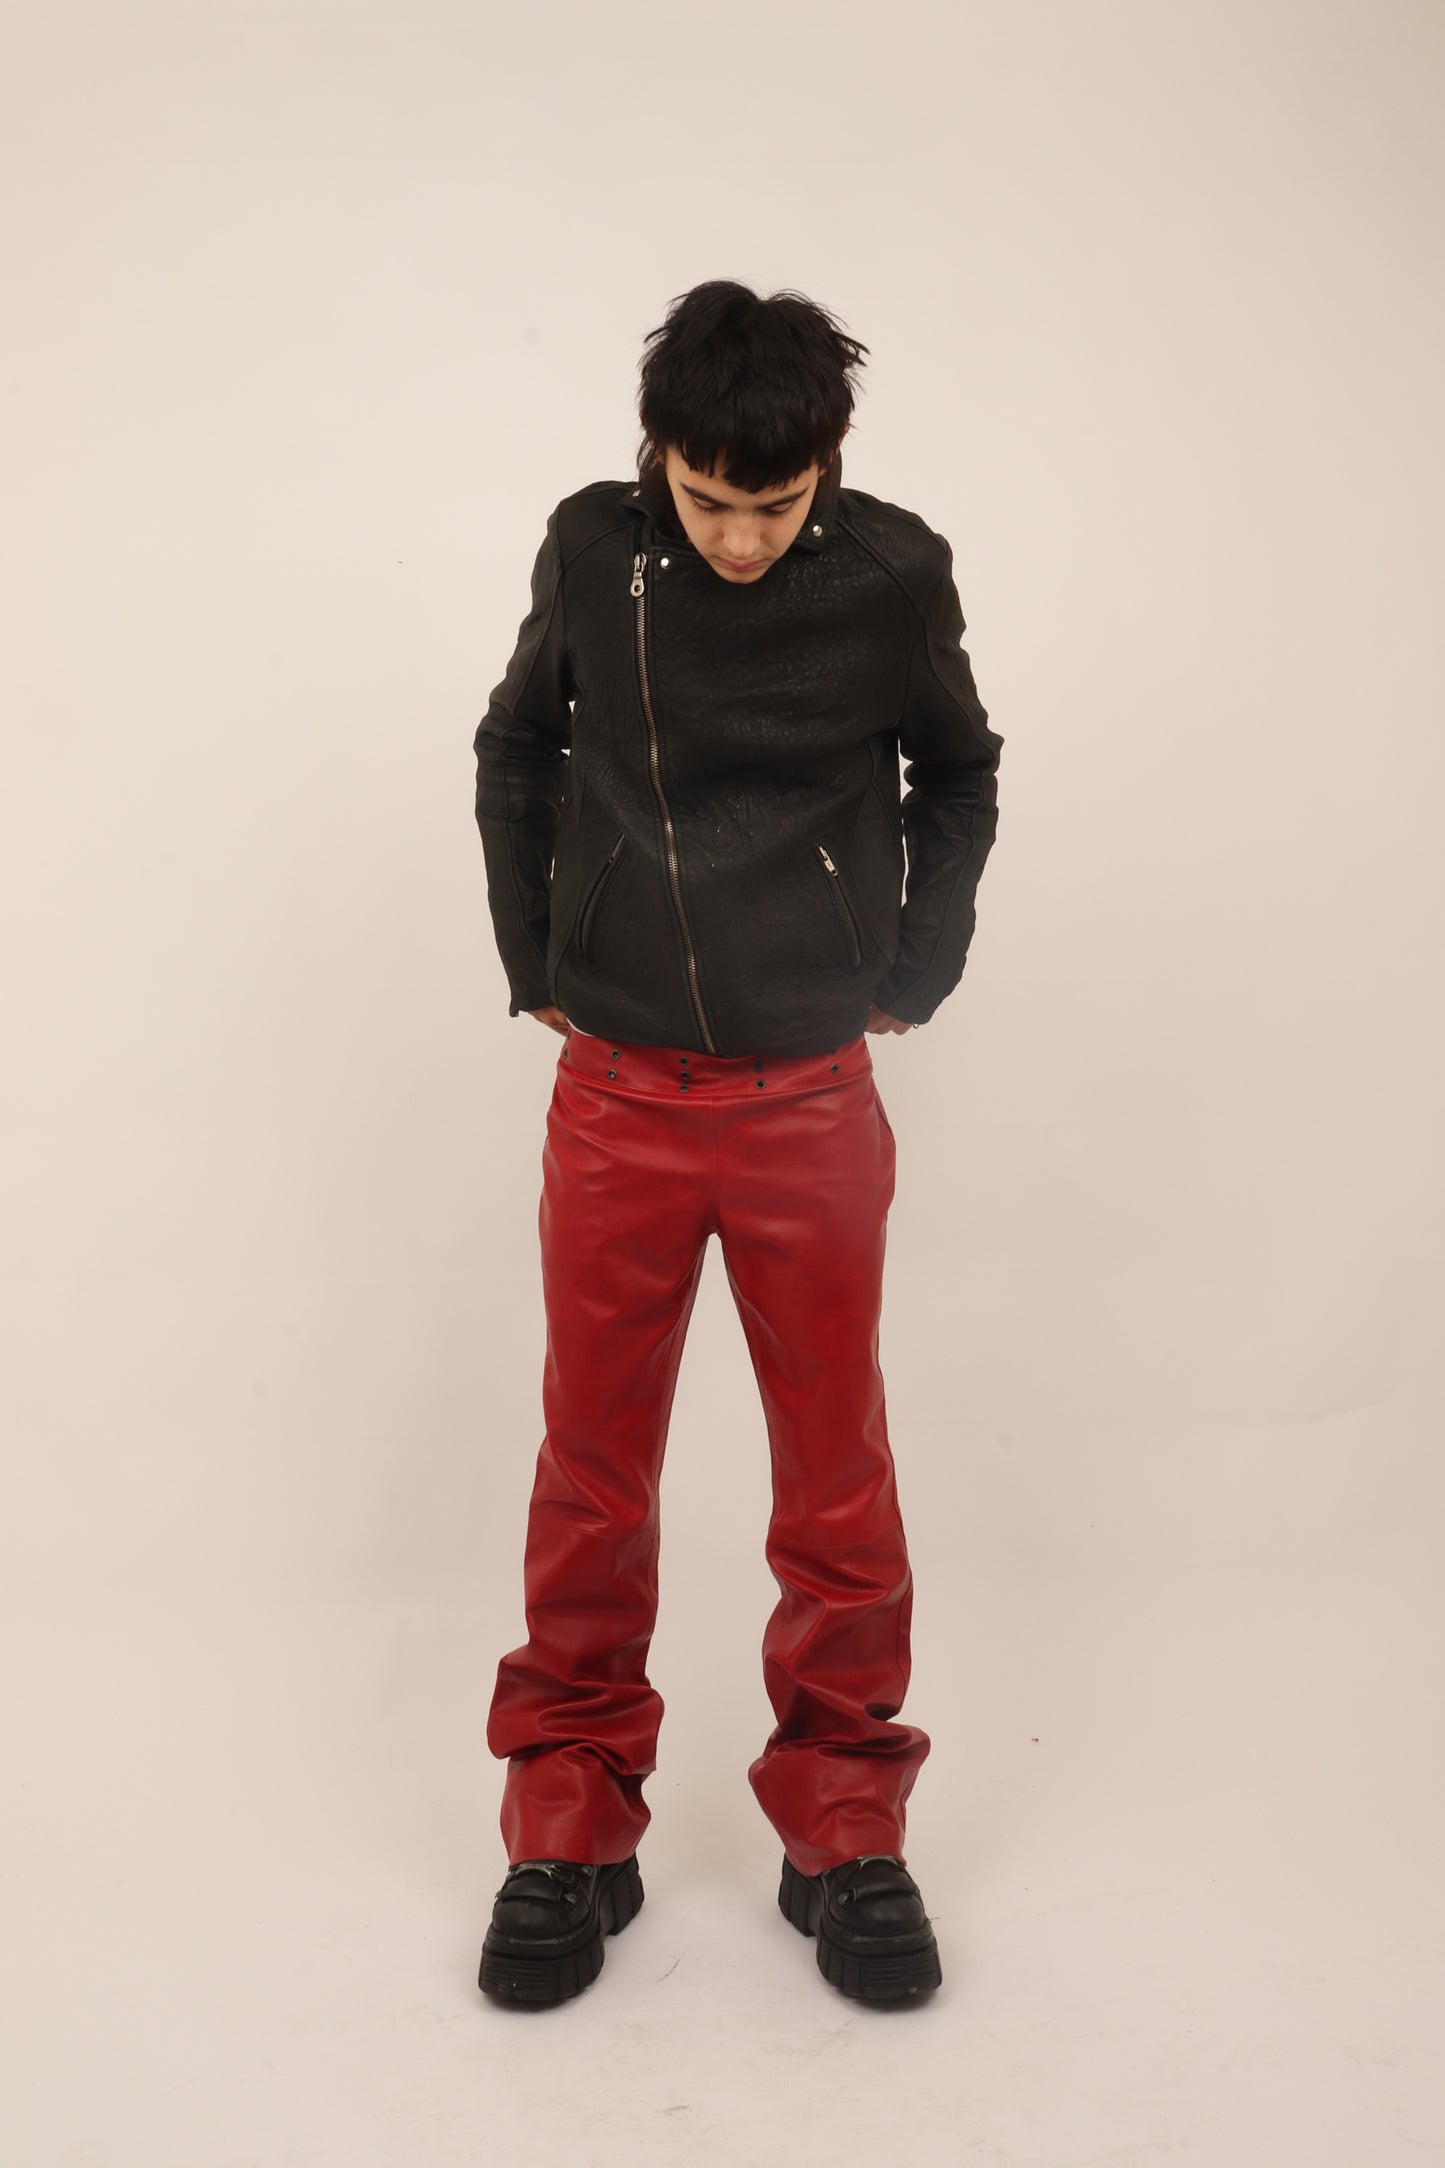 RED LEATHER TROUSERS